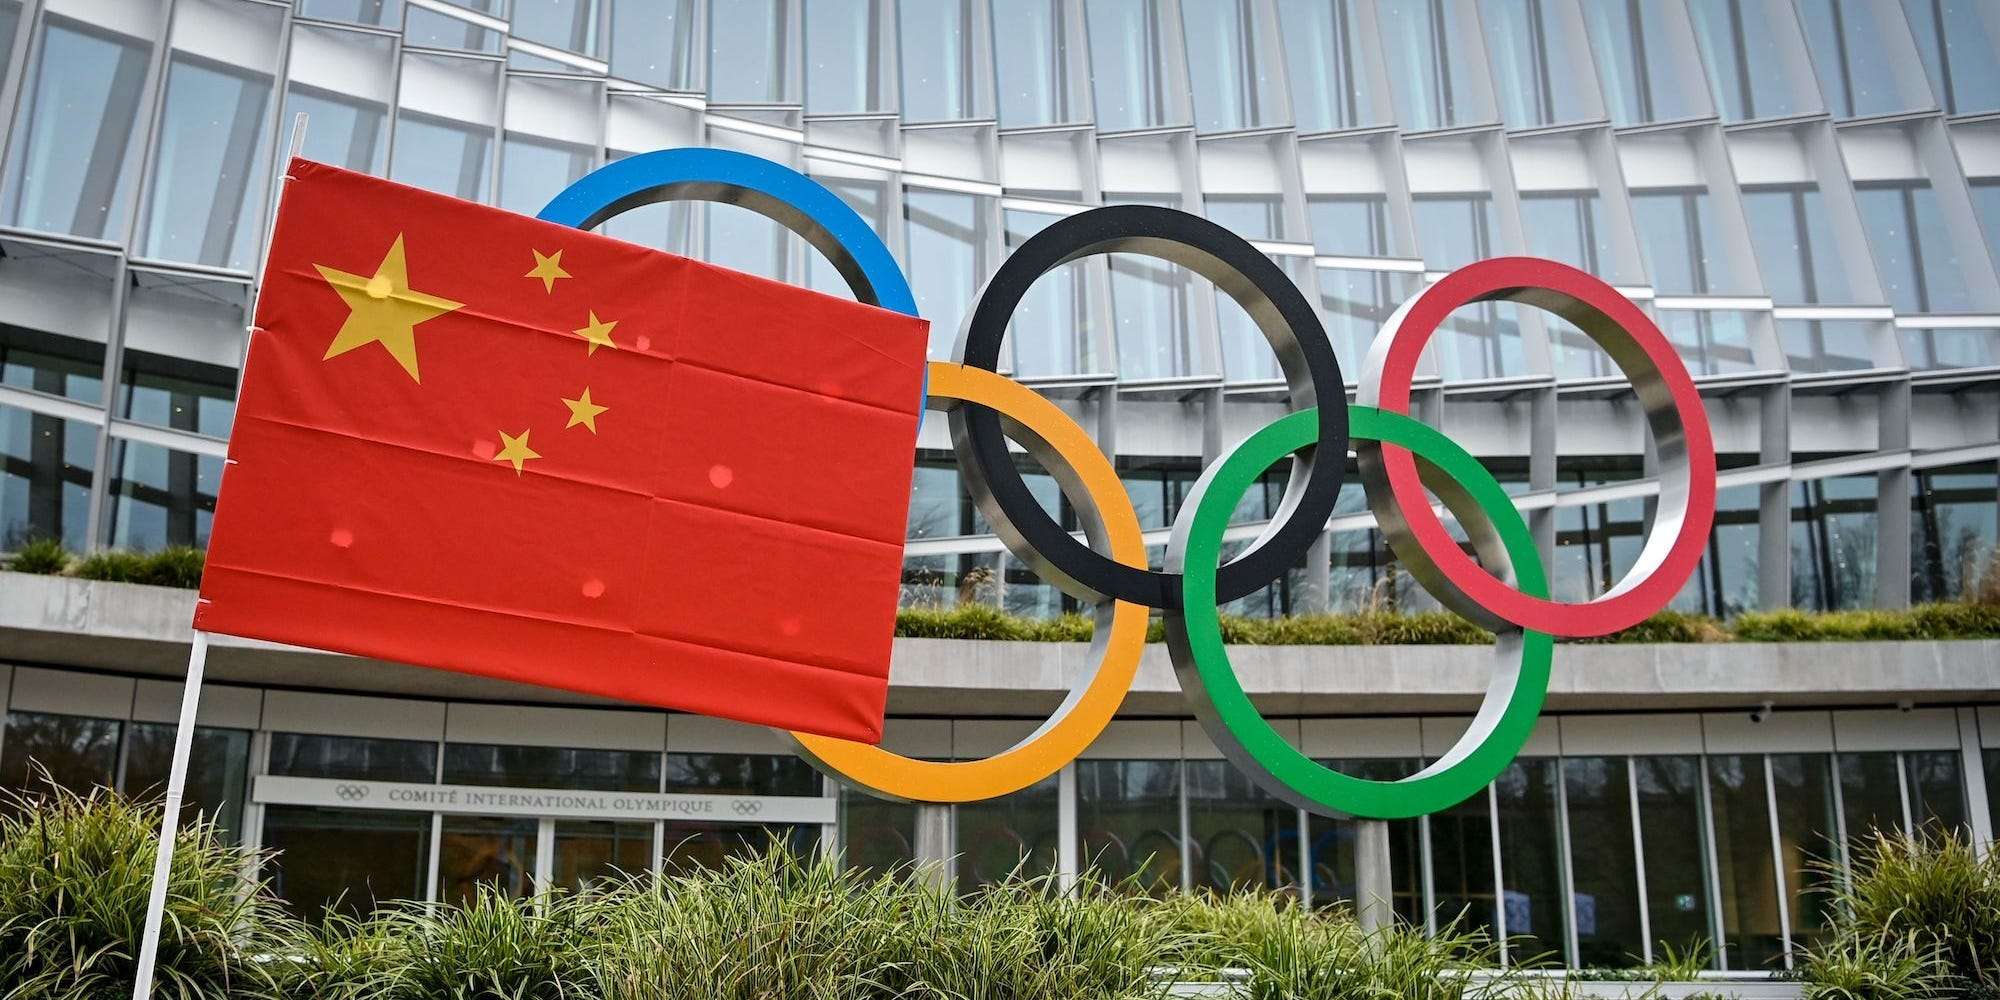 The US is 'not focused on a boycott' of the 2022 Olympics in China amid